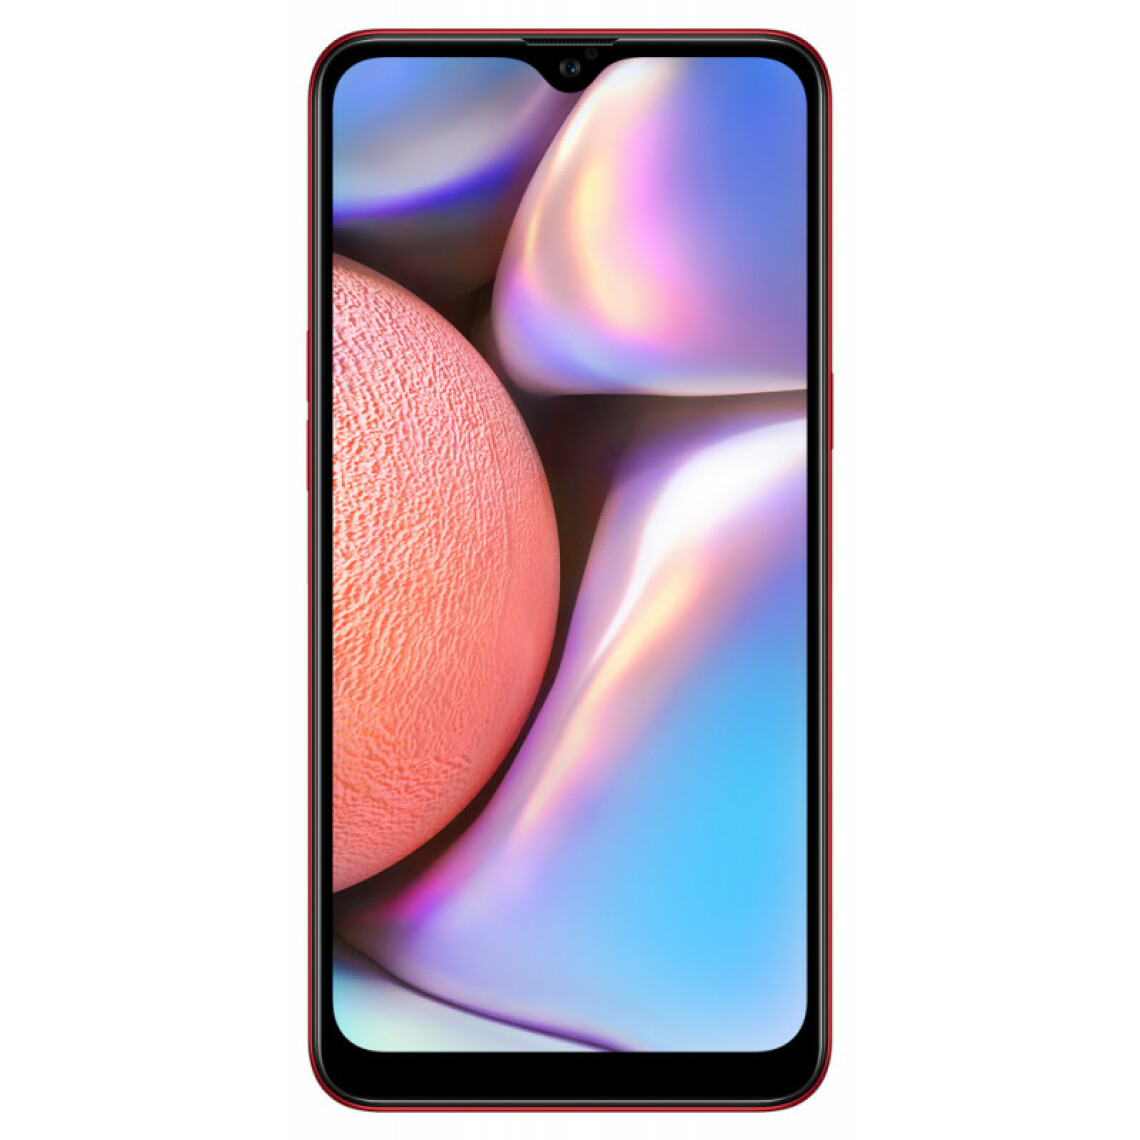 Samsung - Samsung Galaxy A10s - Double Sim - 32Go, 2Go RAM - Rouge (Version non Européenne) - Smartphone Android